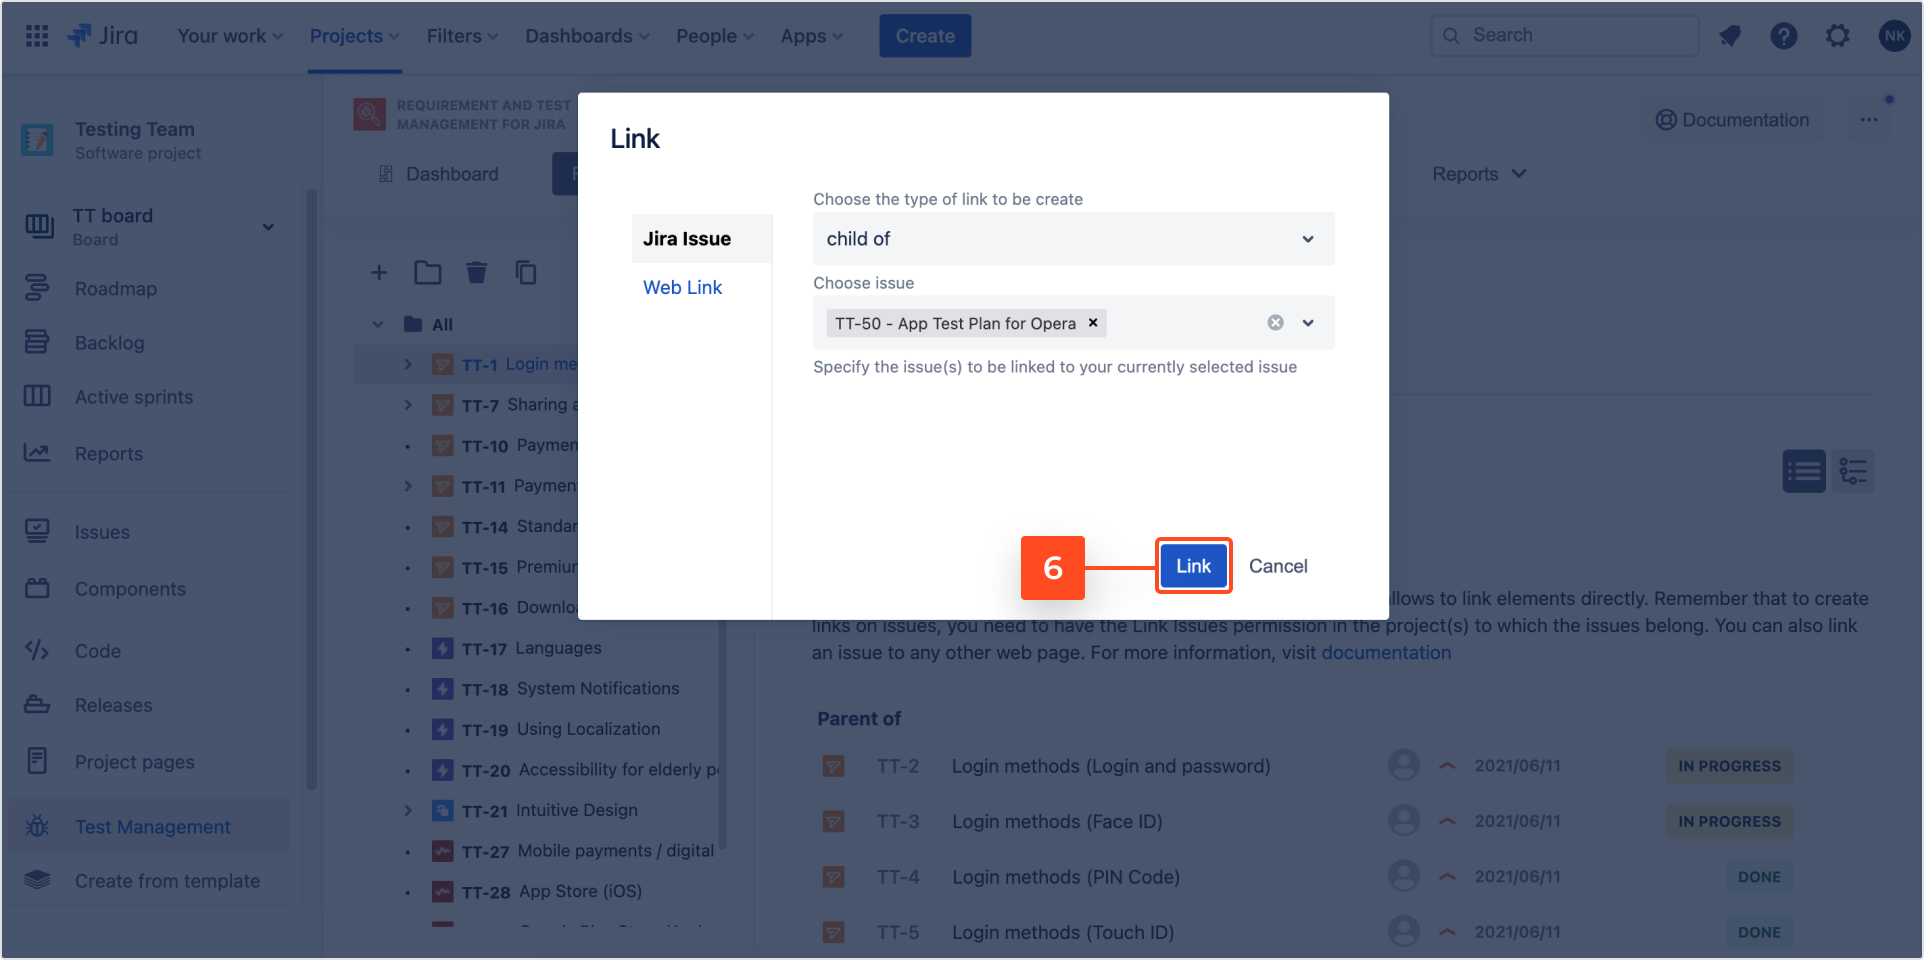 Create link with Requirements and Test Management for Jira app